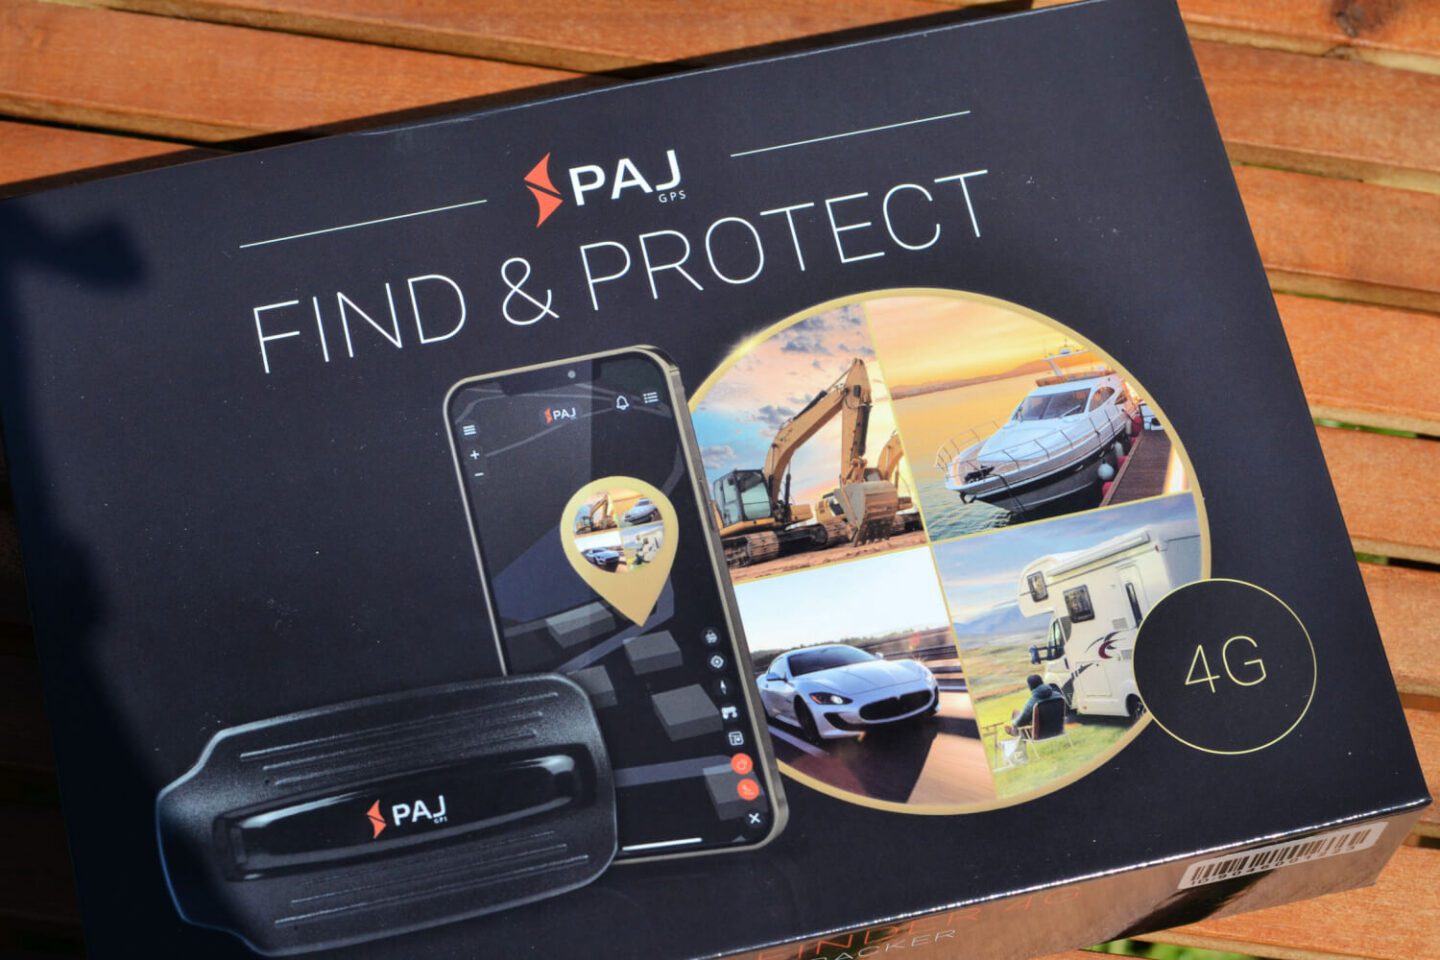 5 Amazing Benefits of a PAJ GPS Tracker - Easy Finder 4G Review *